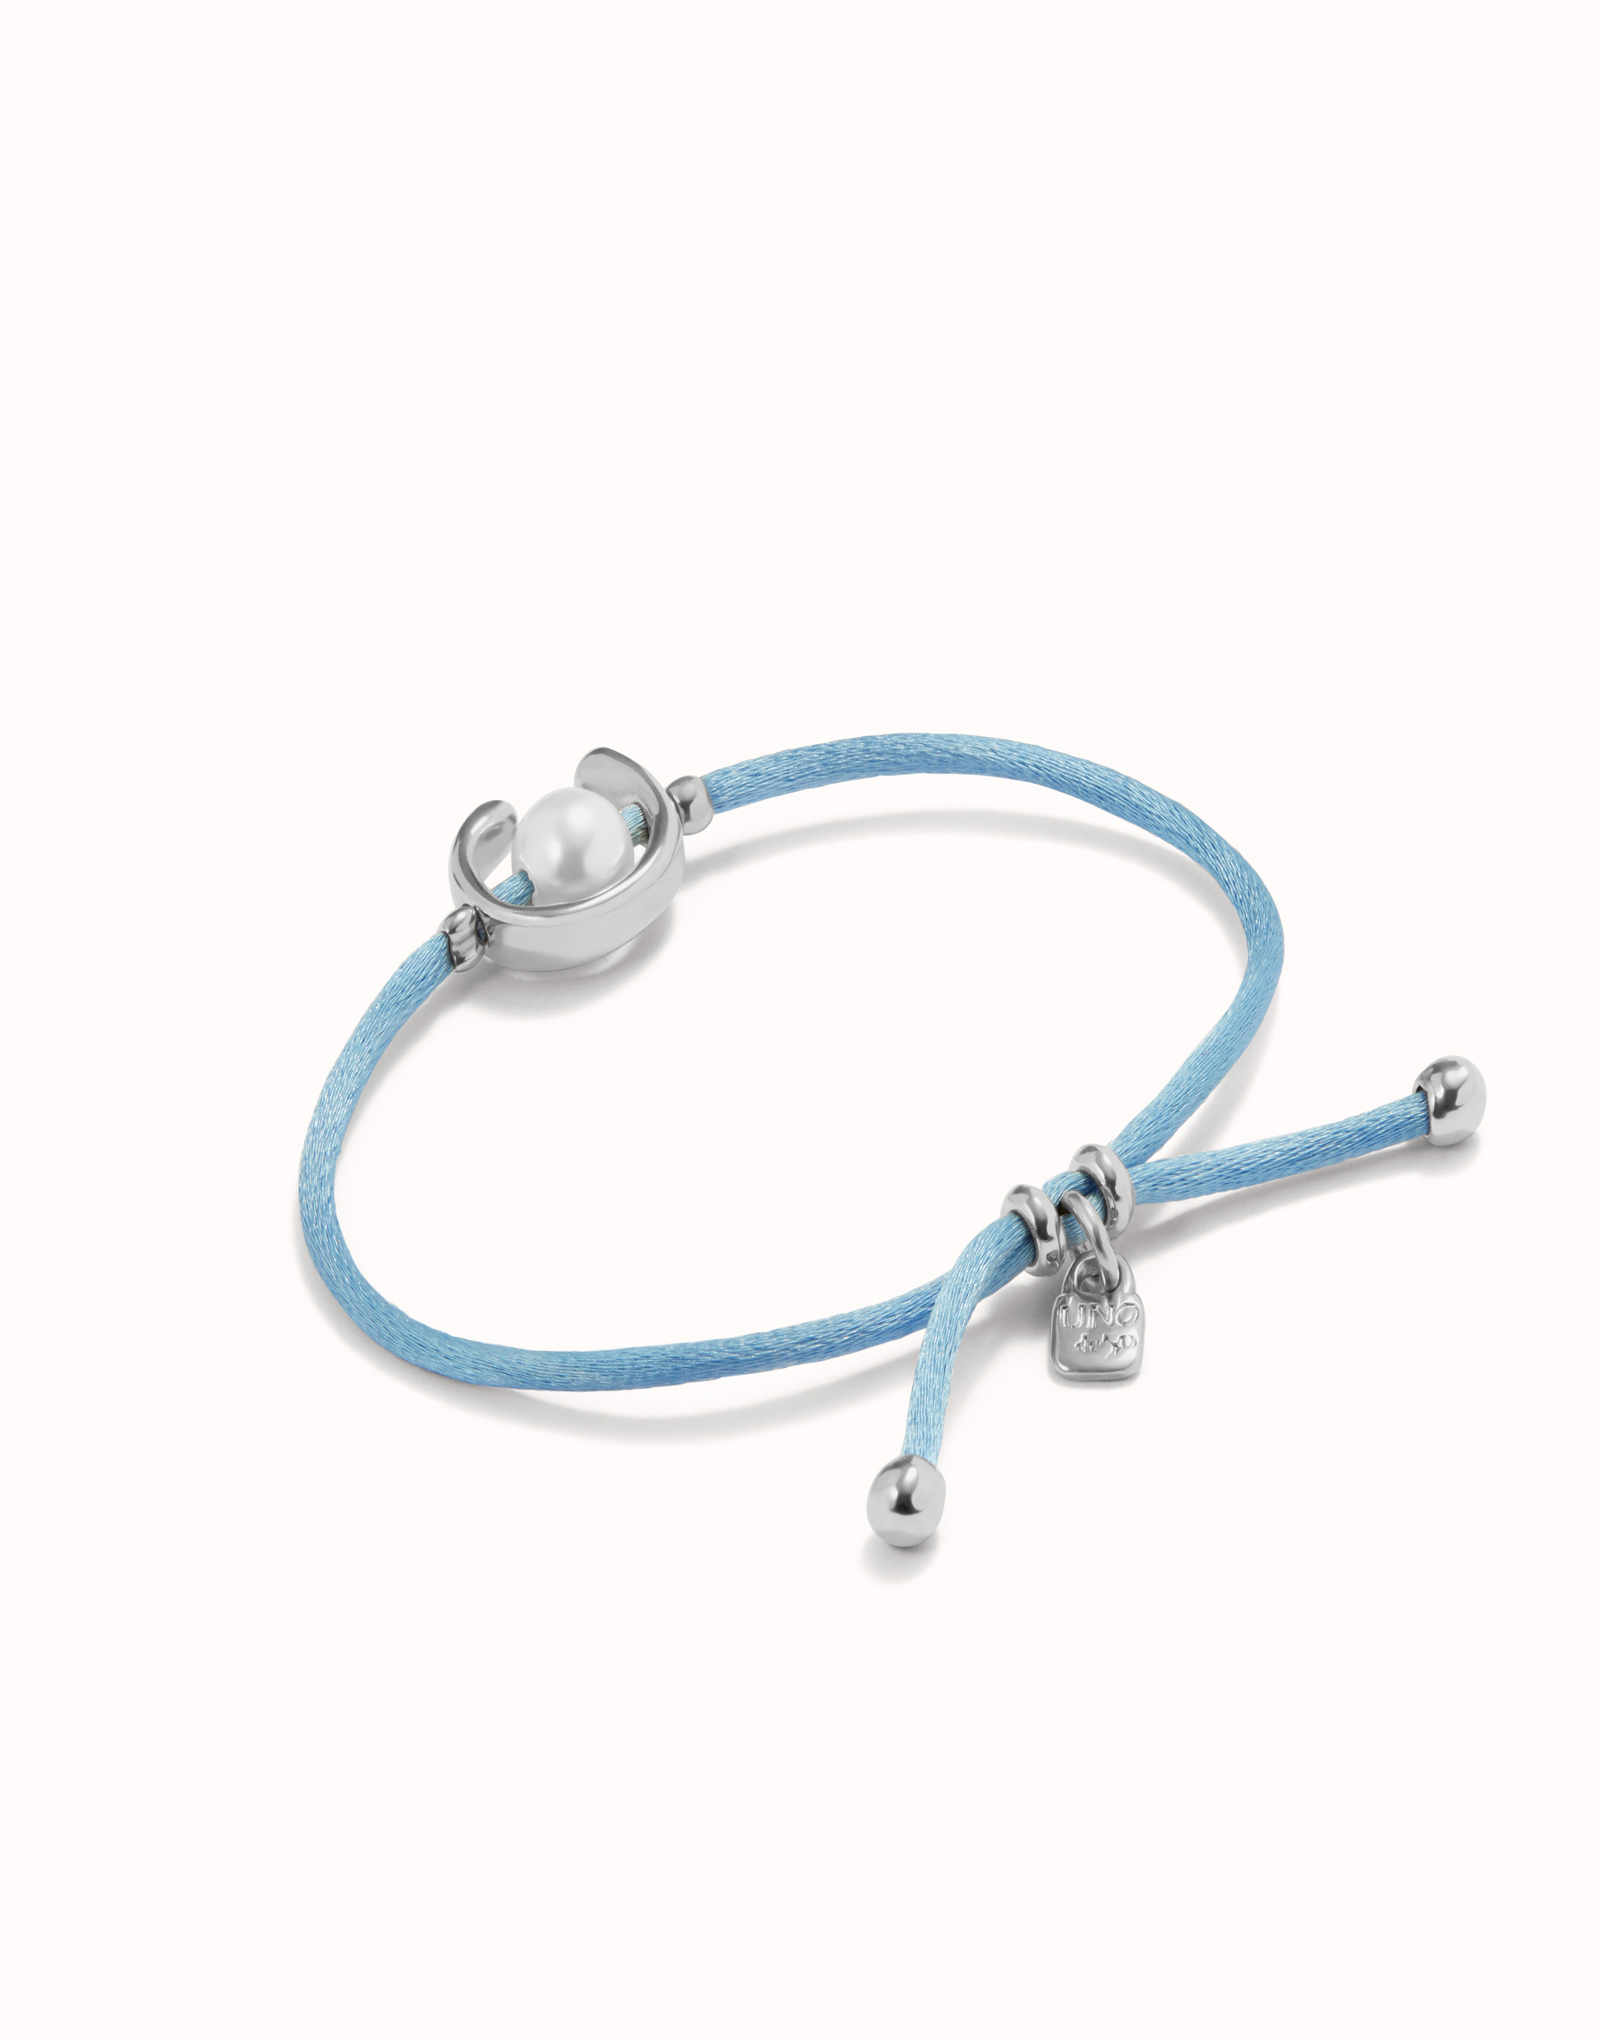 Bracciale in filo blu con perla shell assortimento placcato argento Sterling., Argent, large image number null